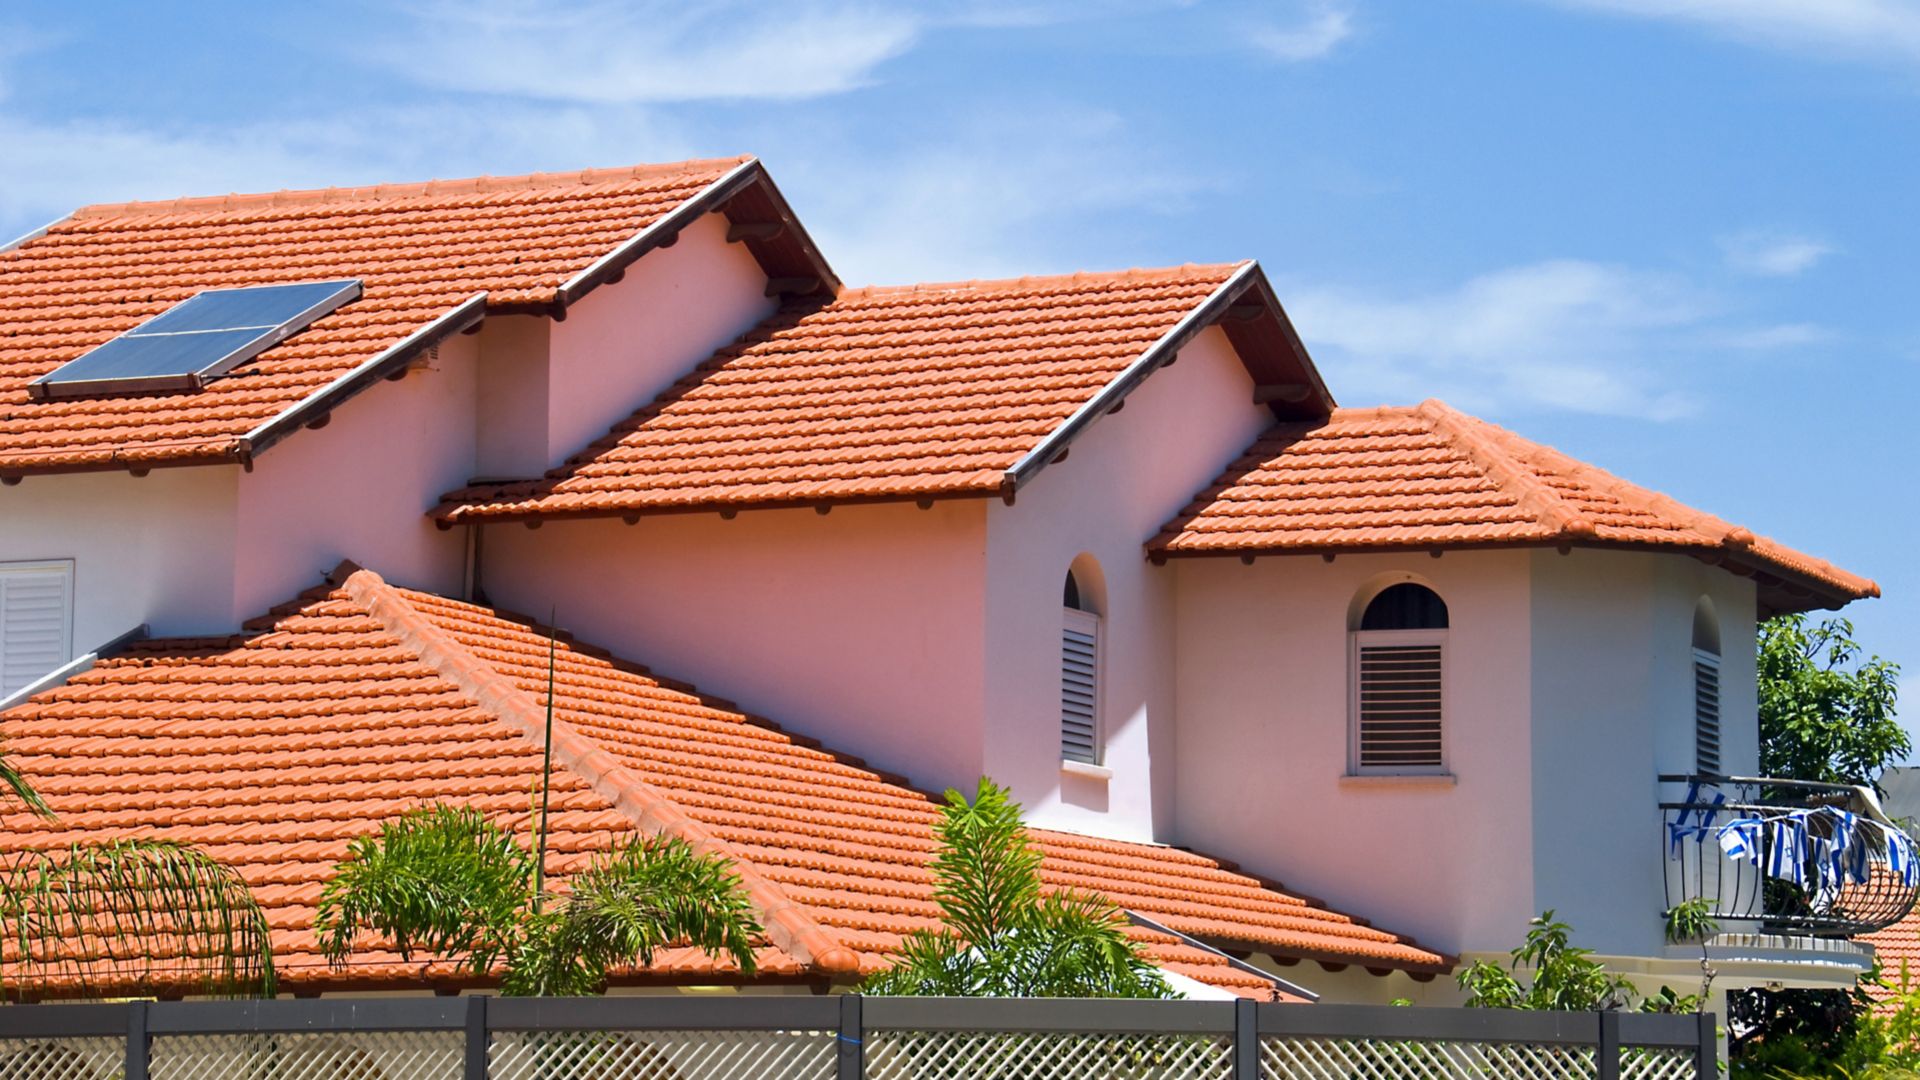 Do You Need A Roof? Read These Ideas.